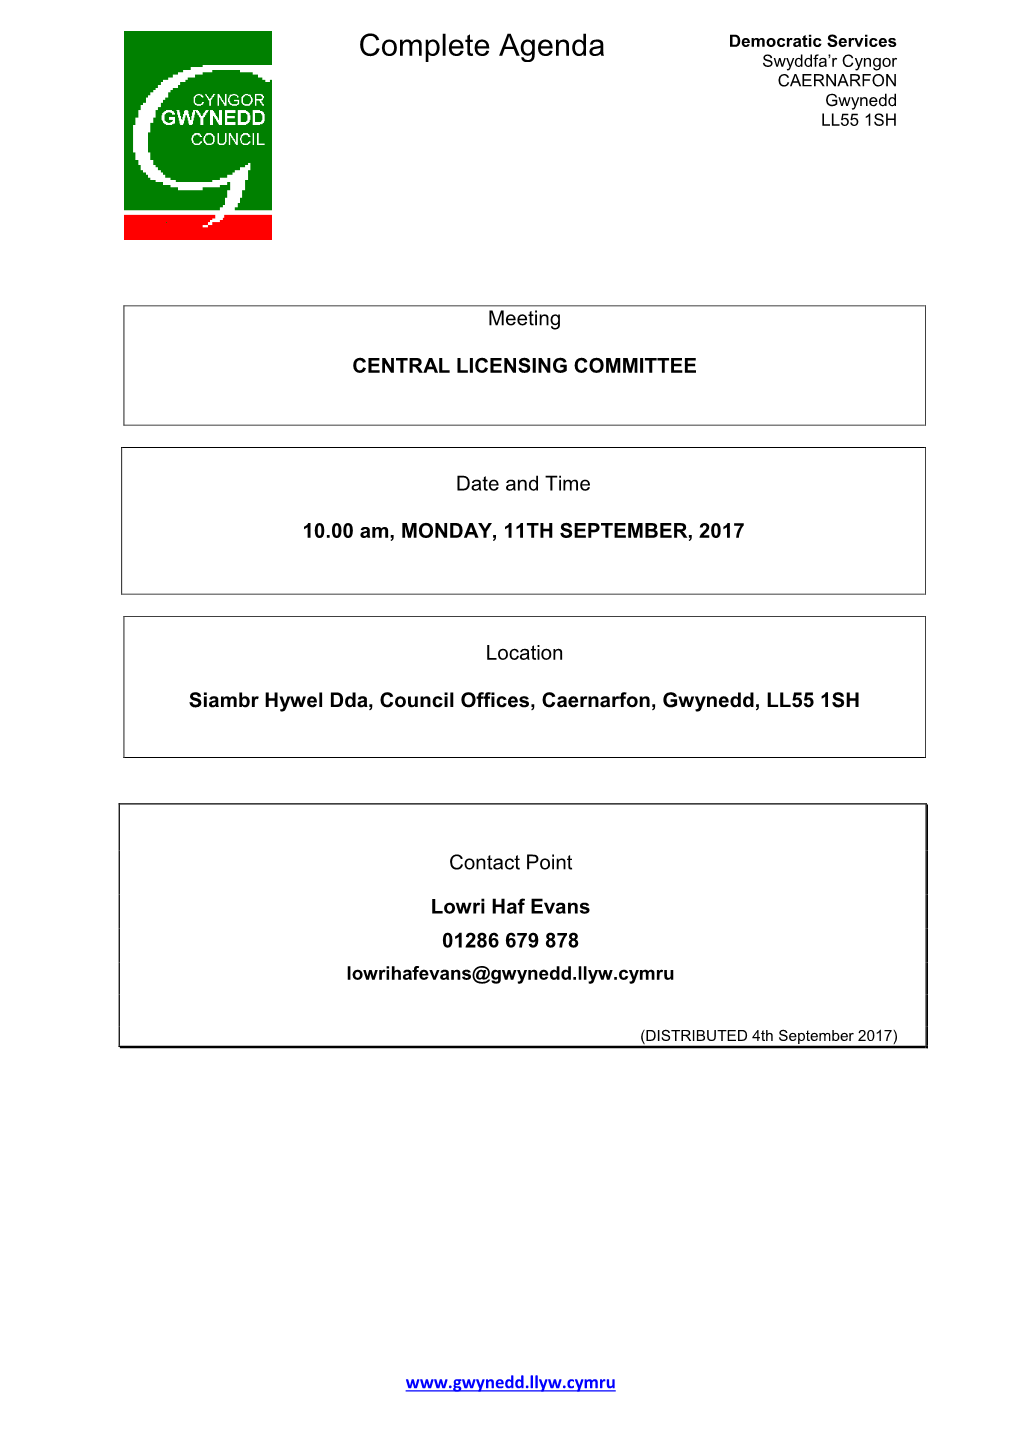 (Public Pack)Agenda Document for Central Licensing Committee, 11/09/2017 10:00